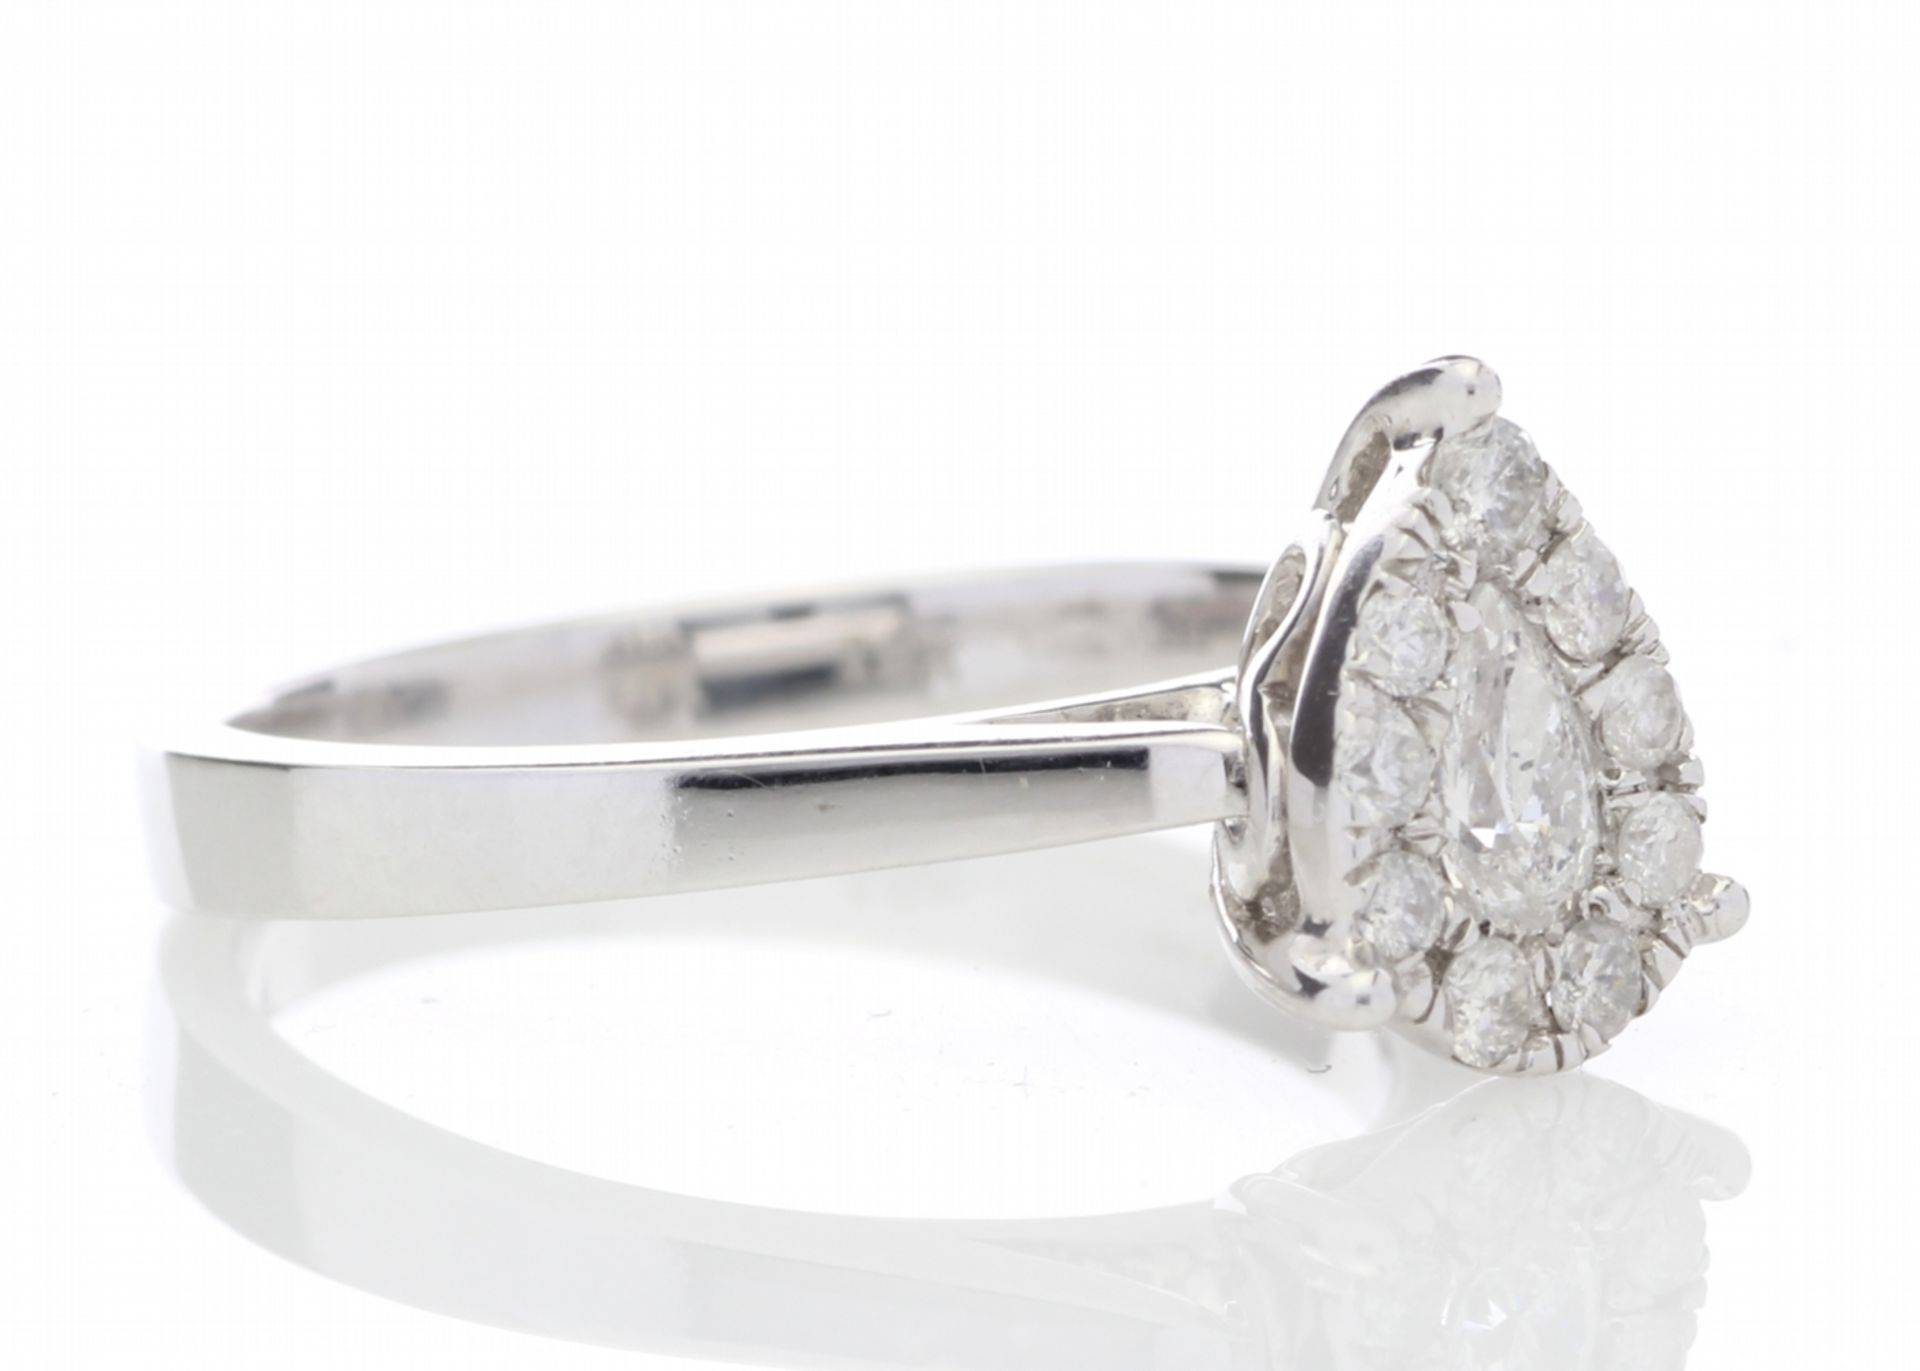 18ct White Gold Pear Cluster Diamond Ring 0.50 Carats - Valued By IDI £6,090.00 - A modern classic - Image 4 of 5